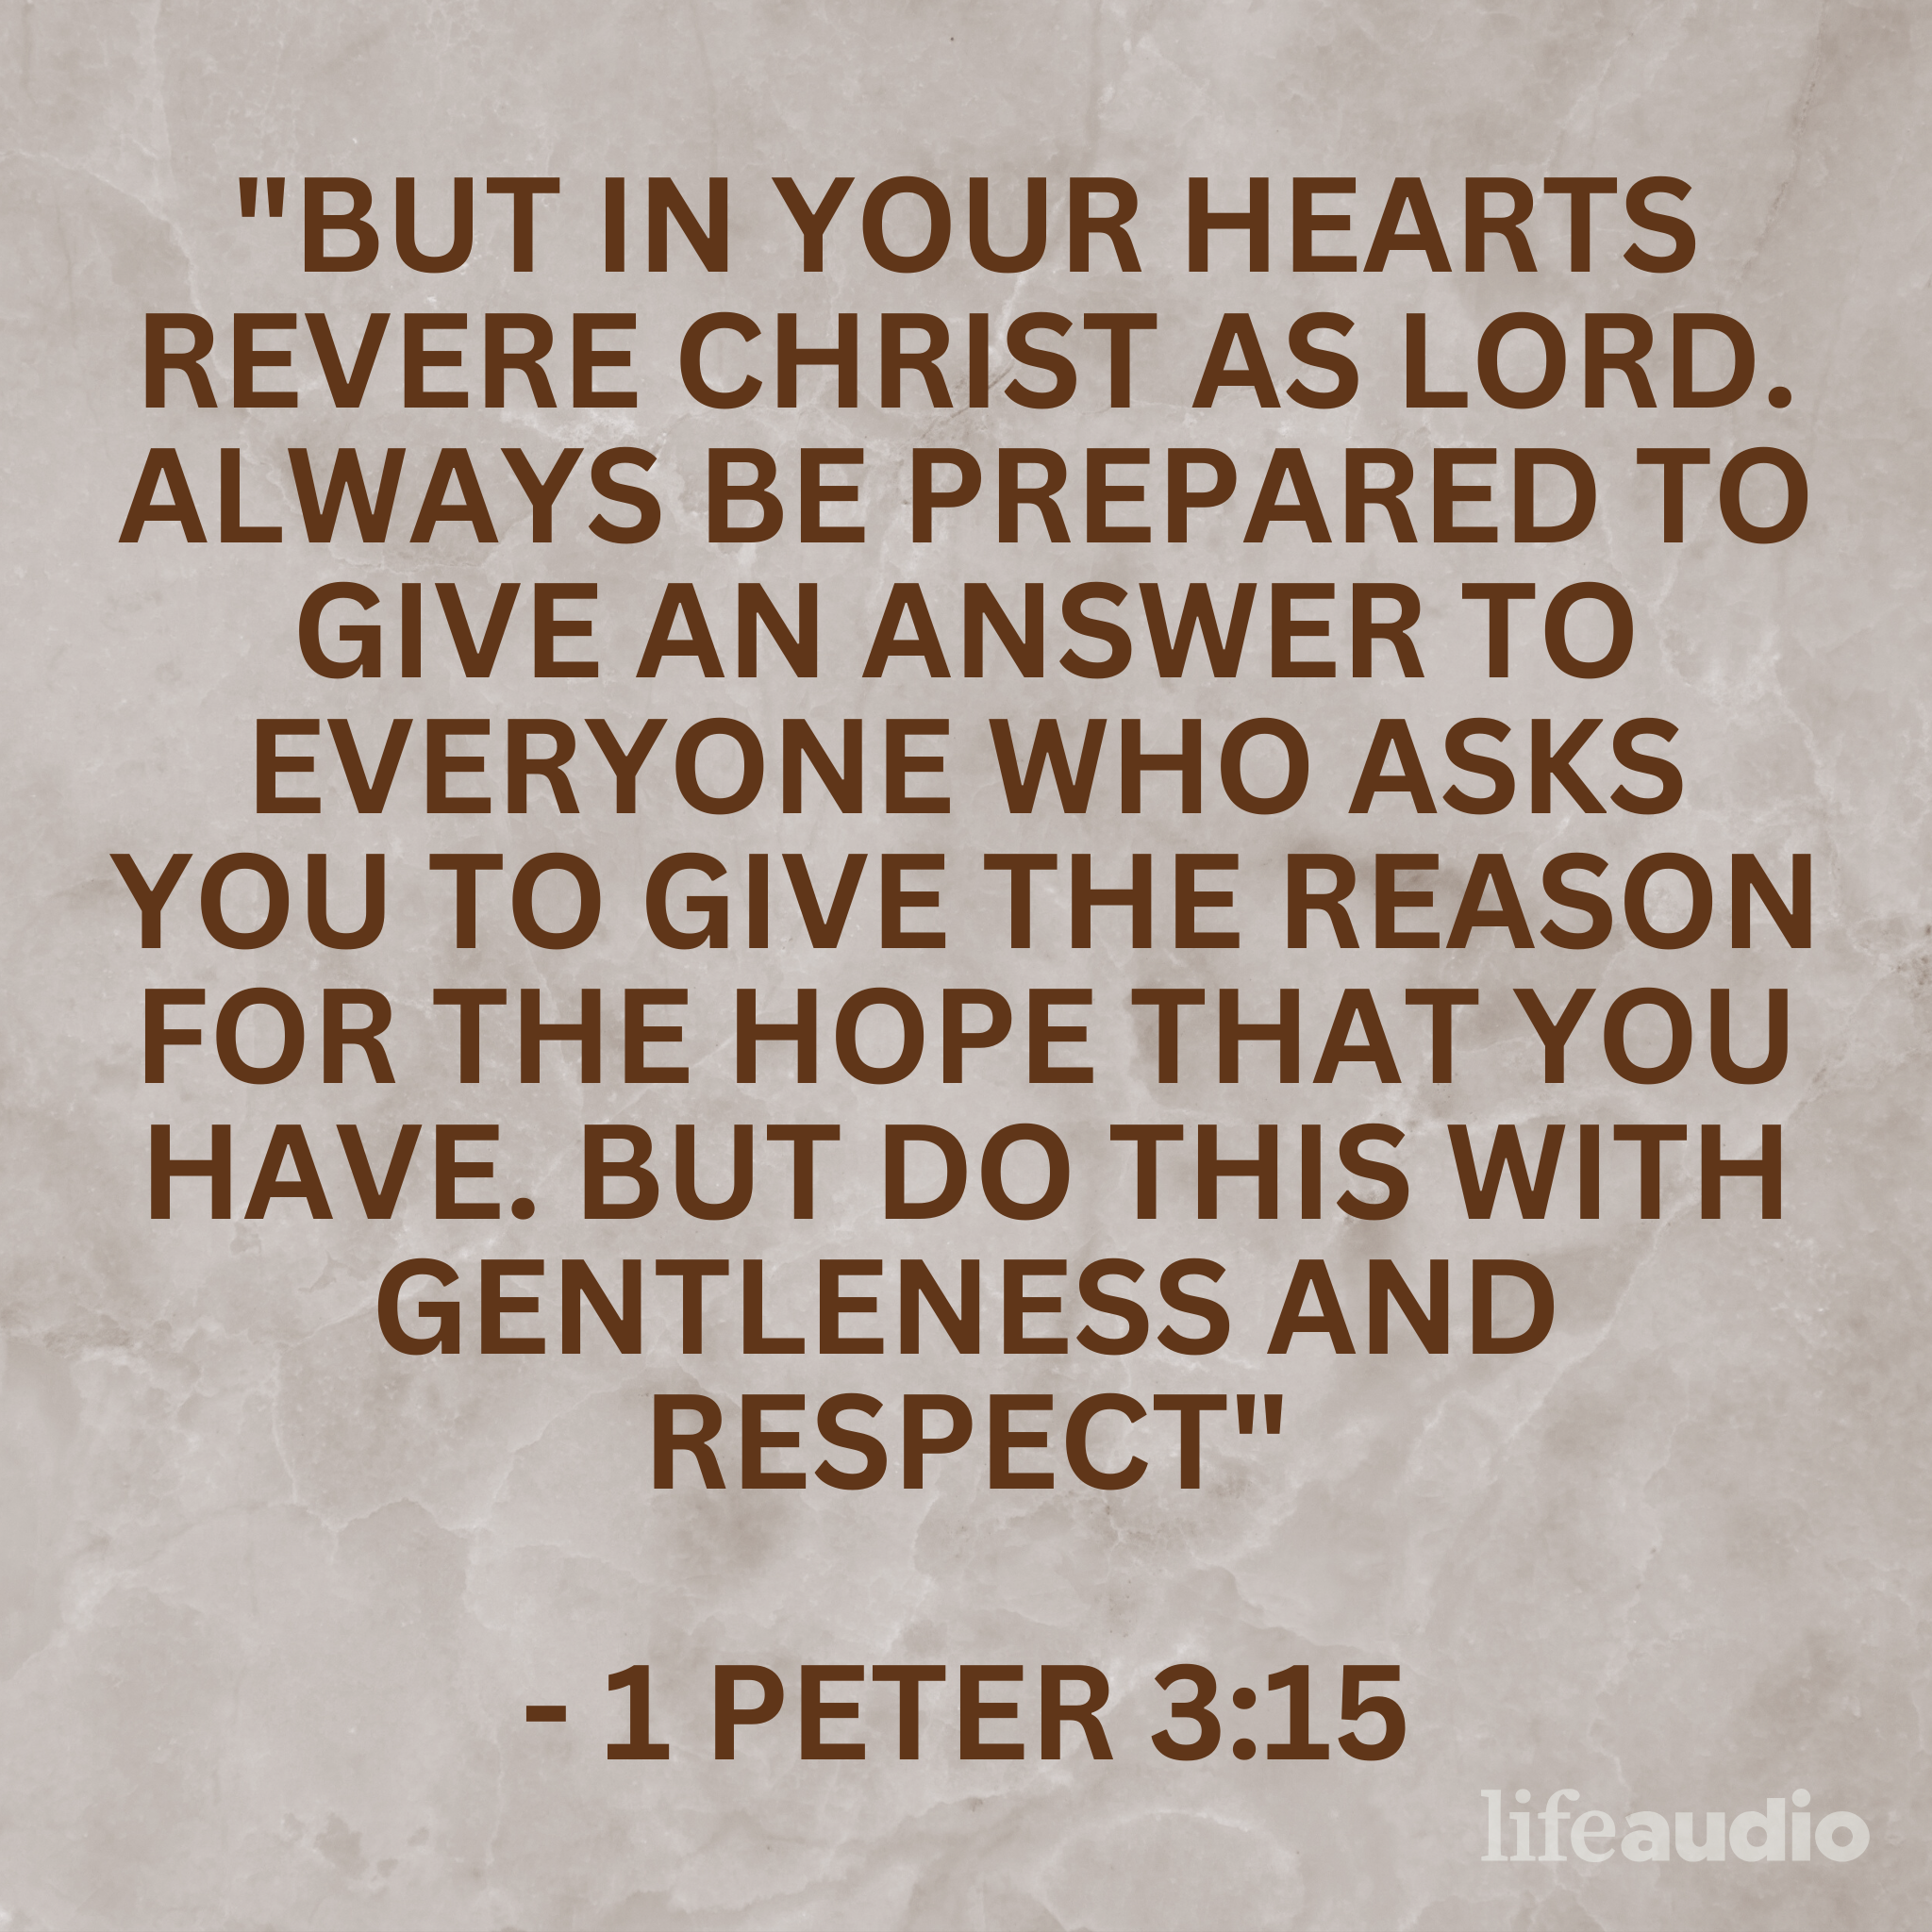 Best Of: What's Your Reason for Hope? (1 Peter 3:15)